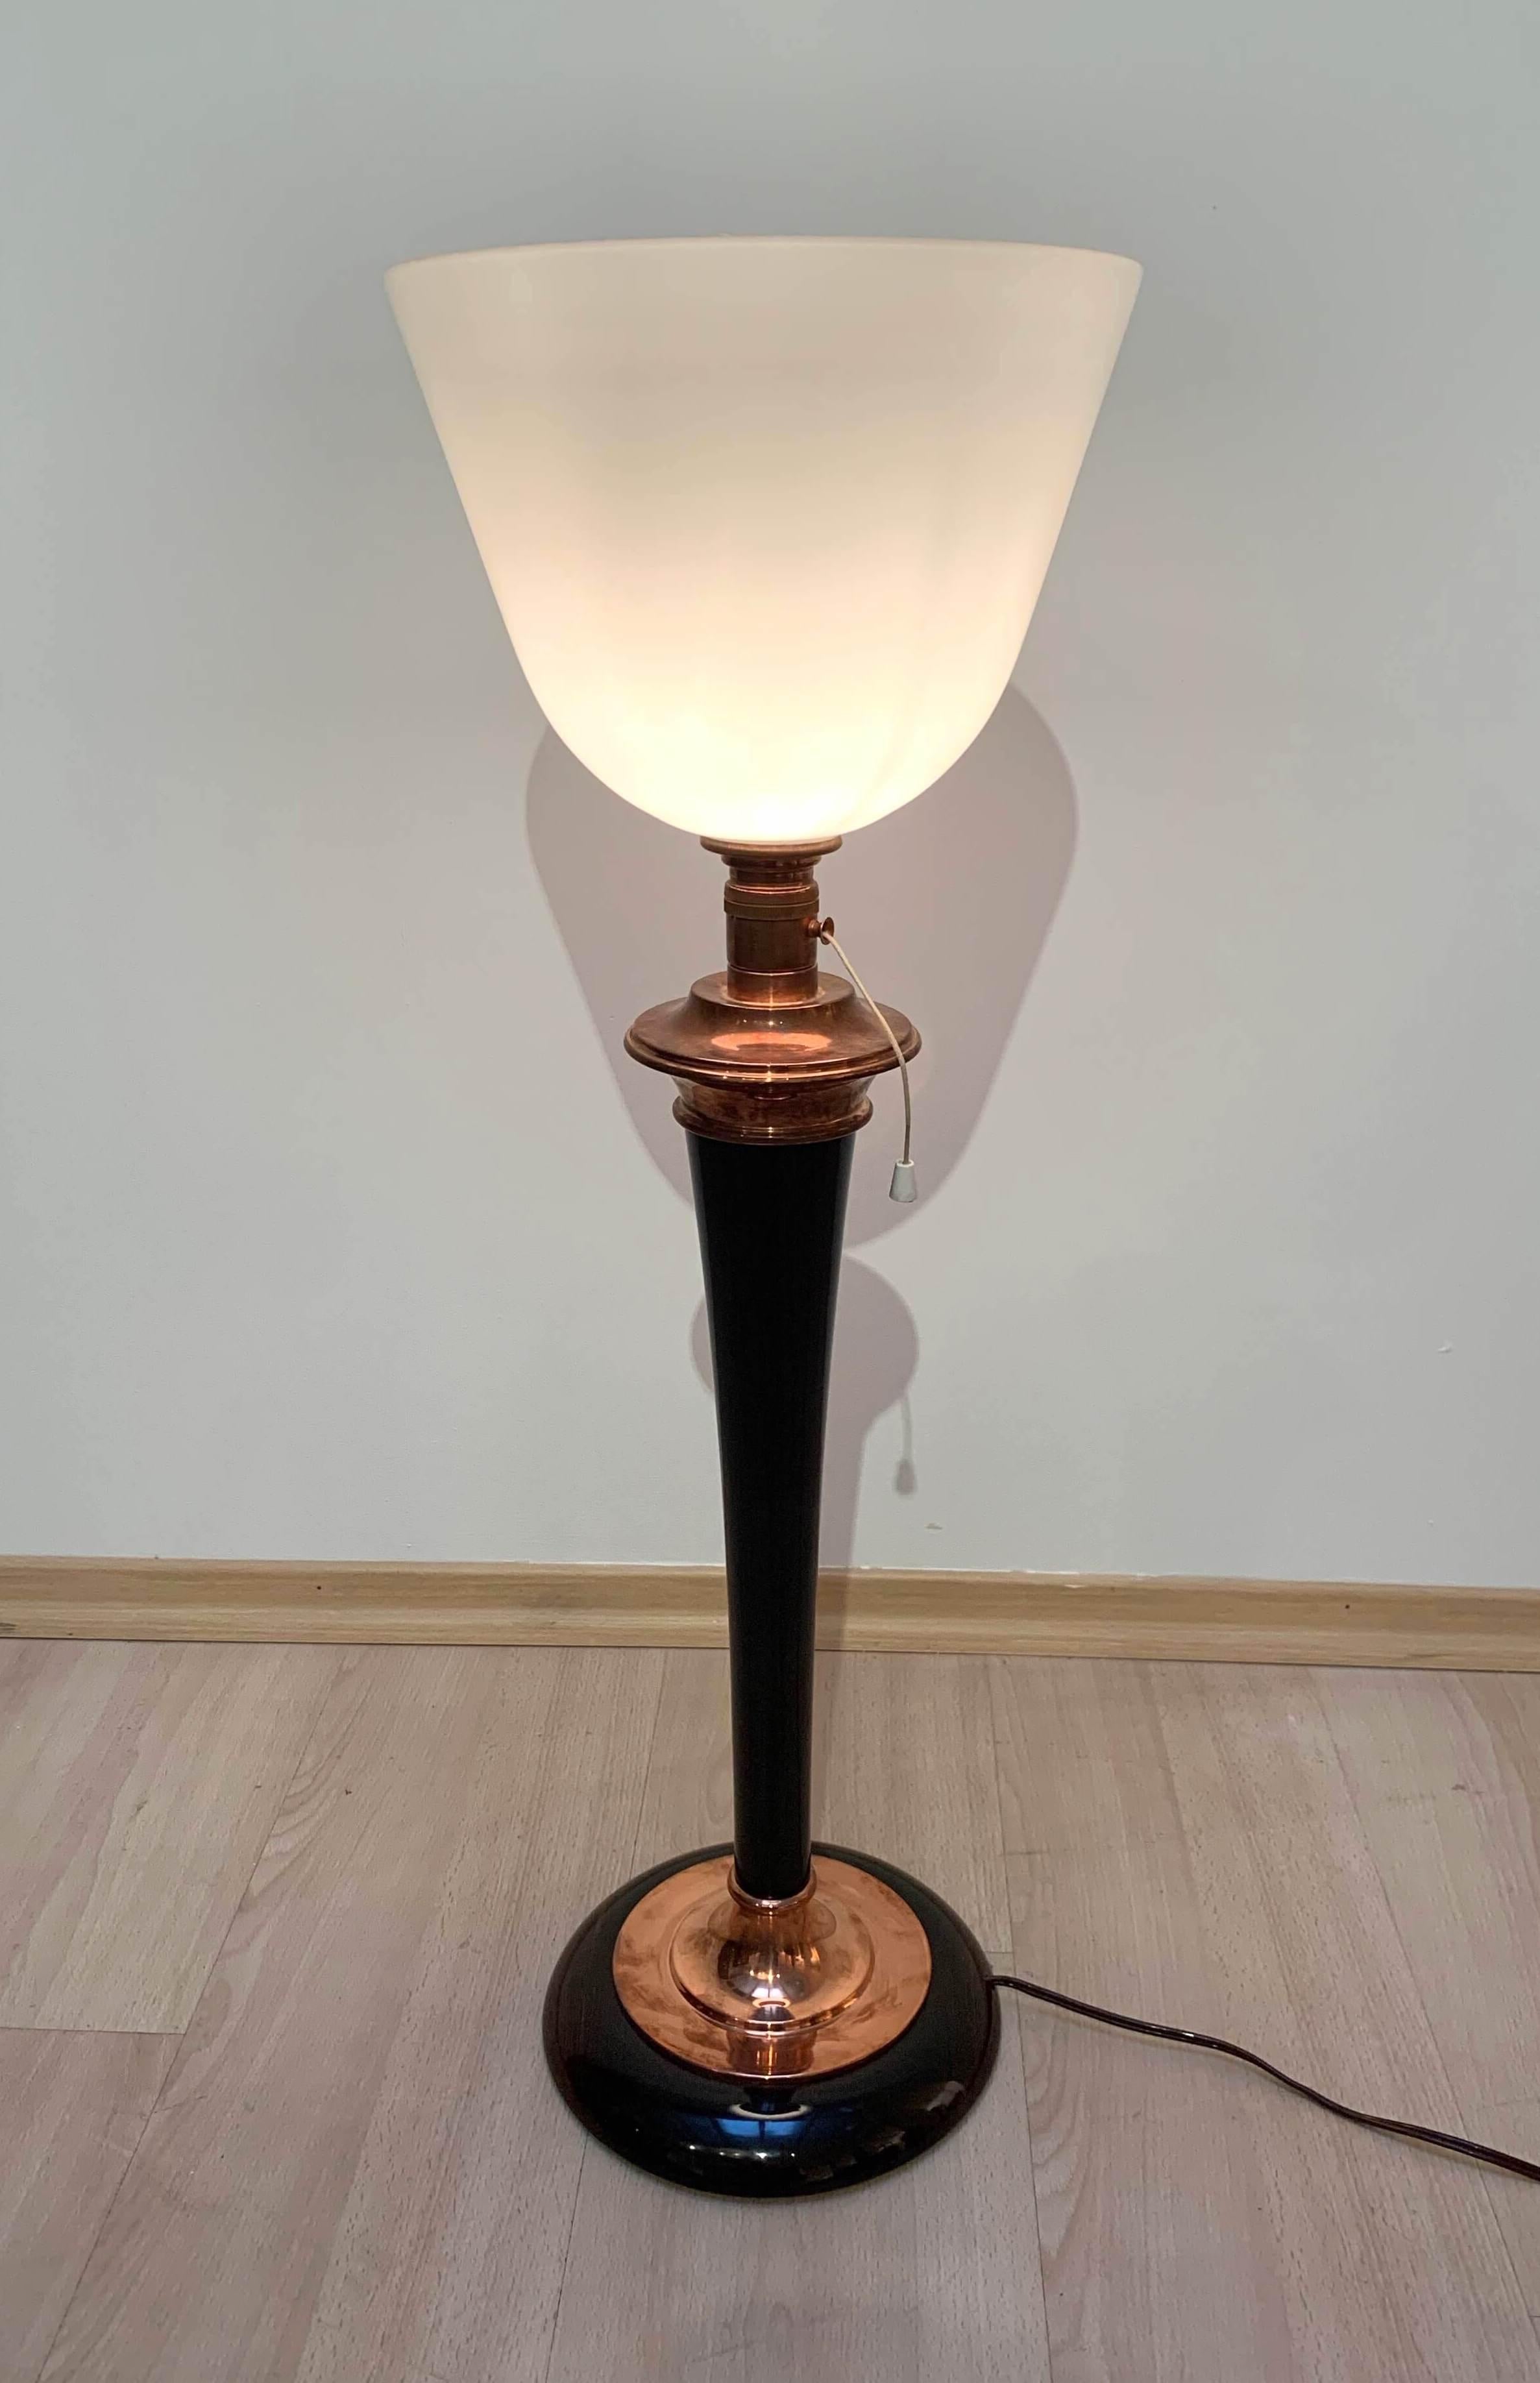 Original classic French Art Deco period table lamp by french Maunfacturer 'Mazda, Paris'

Original glass shade.
Polished Palisander rosewood stand and copper parts.
Fully functional electrics with lace for switching on/off.